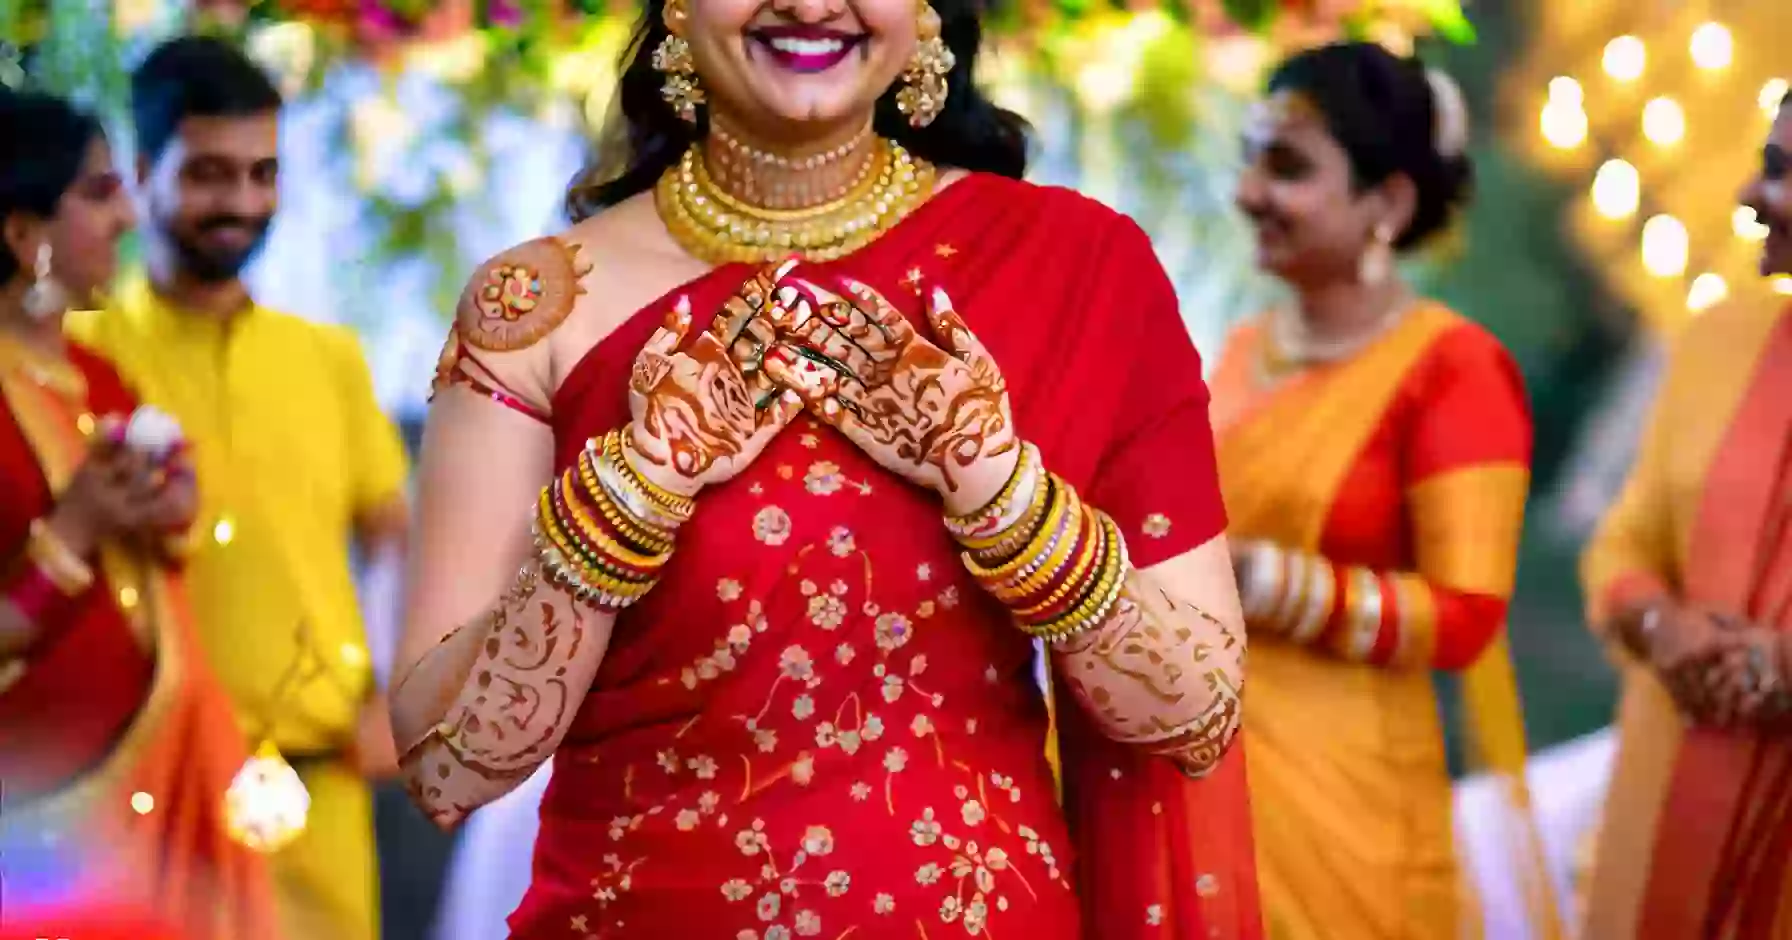 traditional customs related to weddings in India